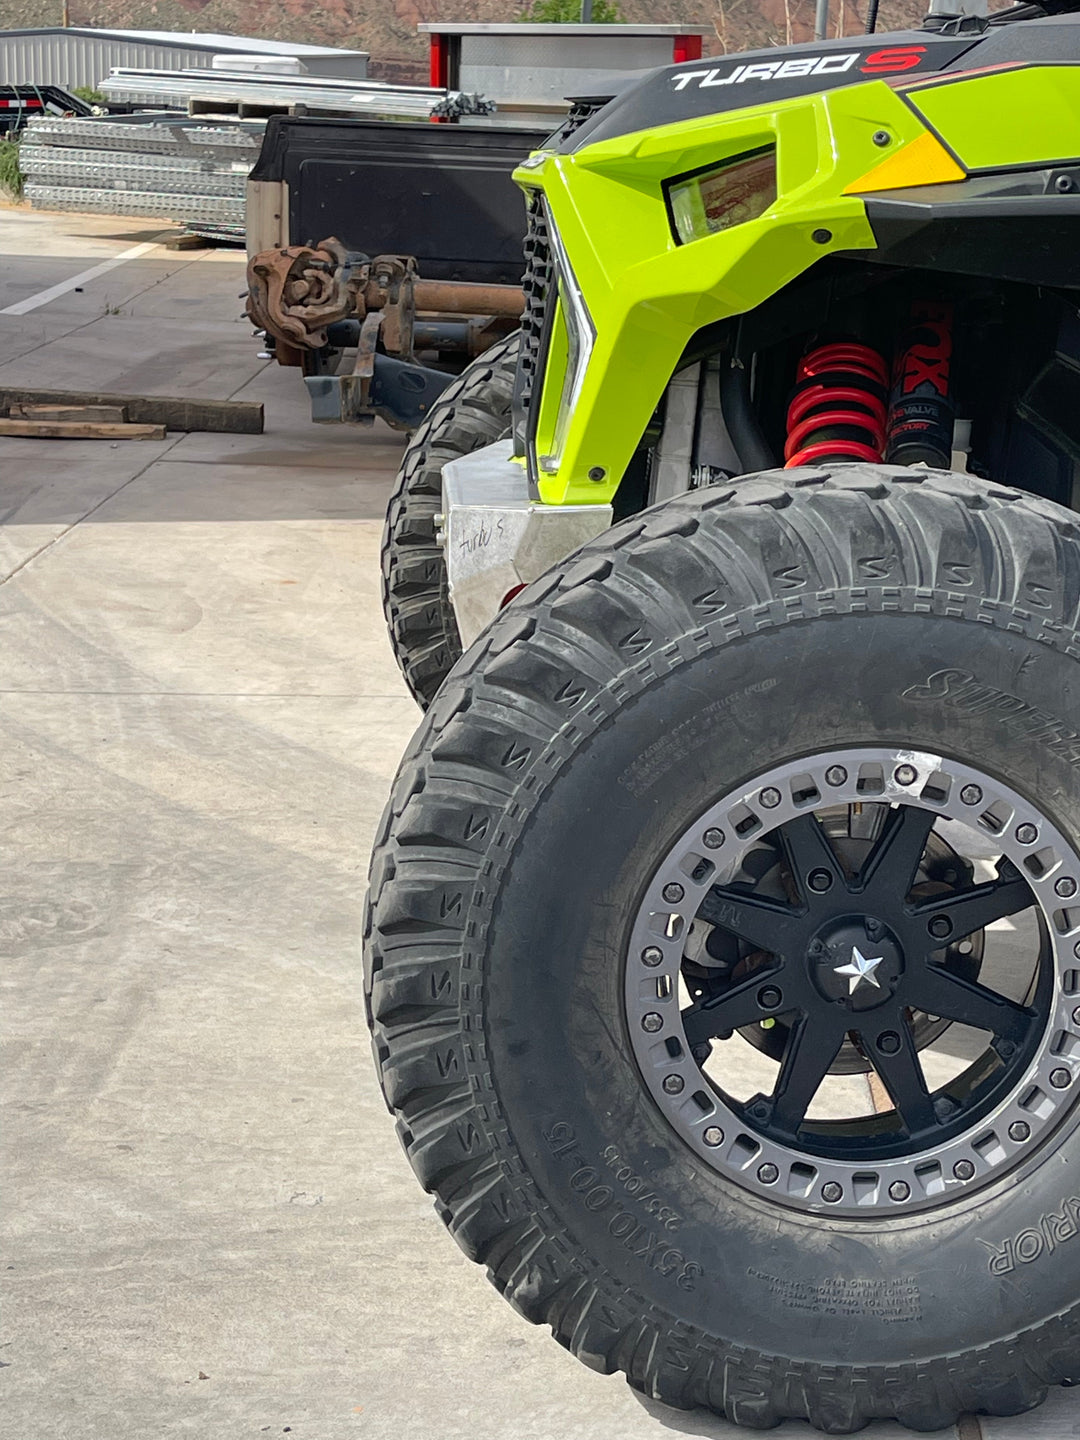 RZR Turbo S Front Bumper - Flog Industries